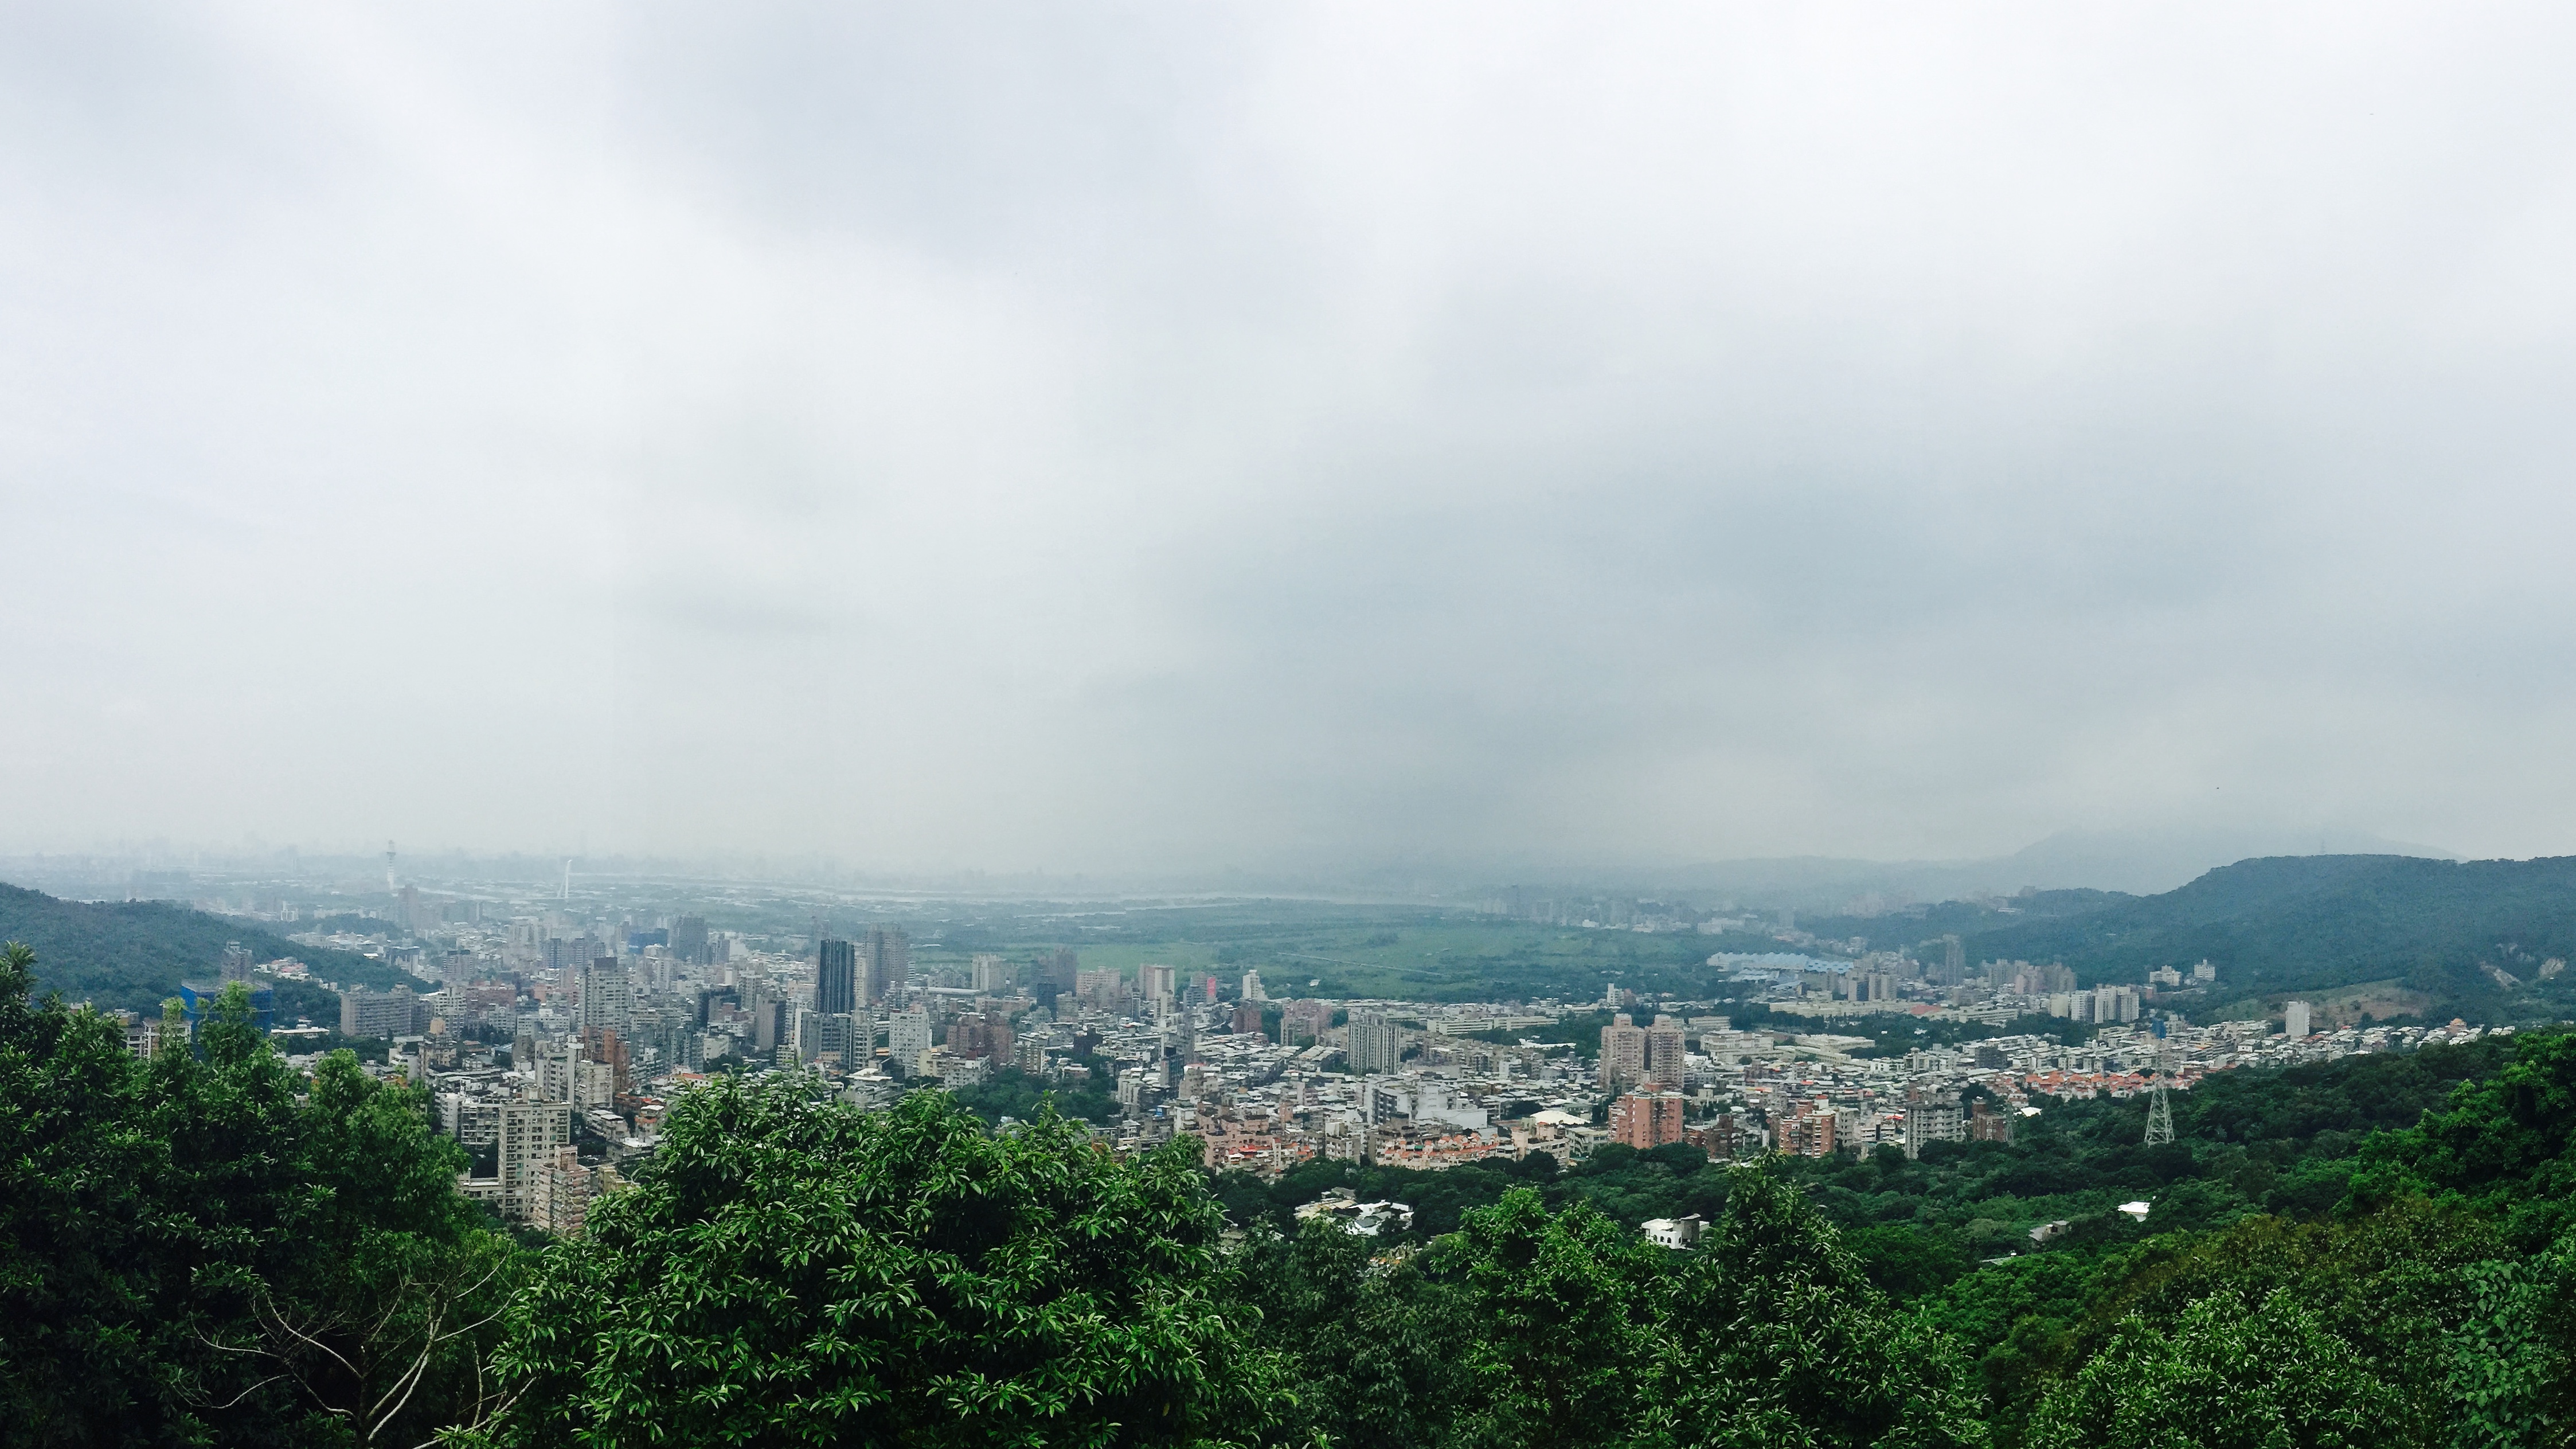 A view of Beitou district from Yangmingshan